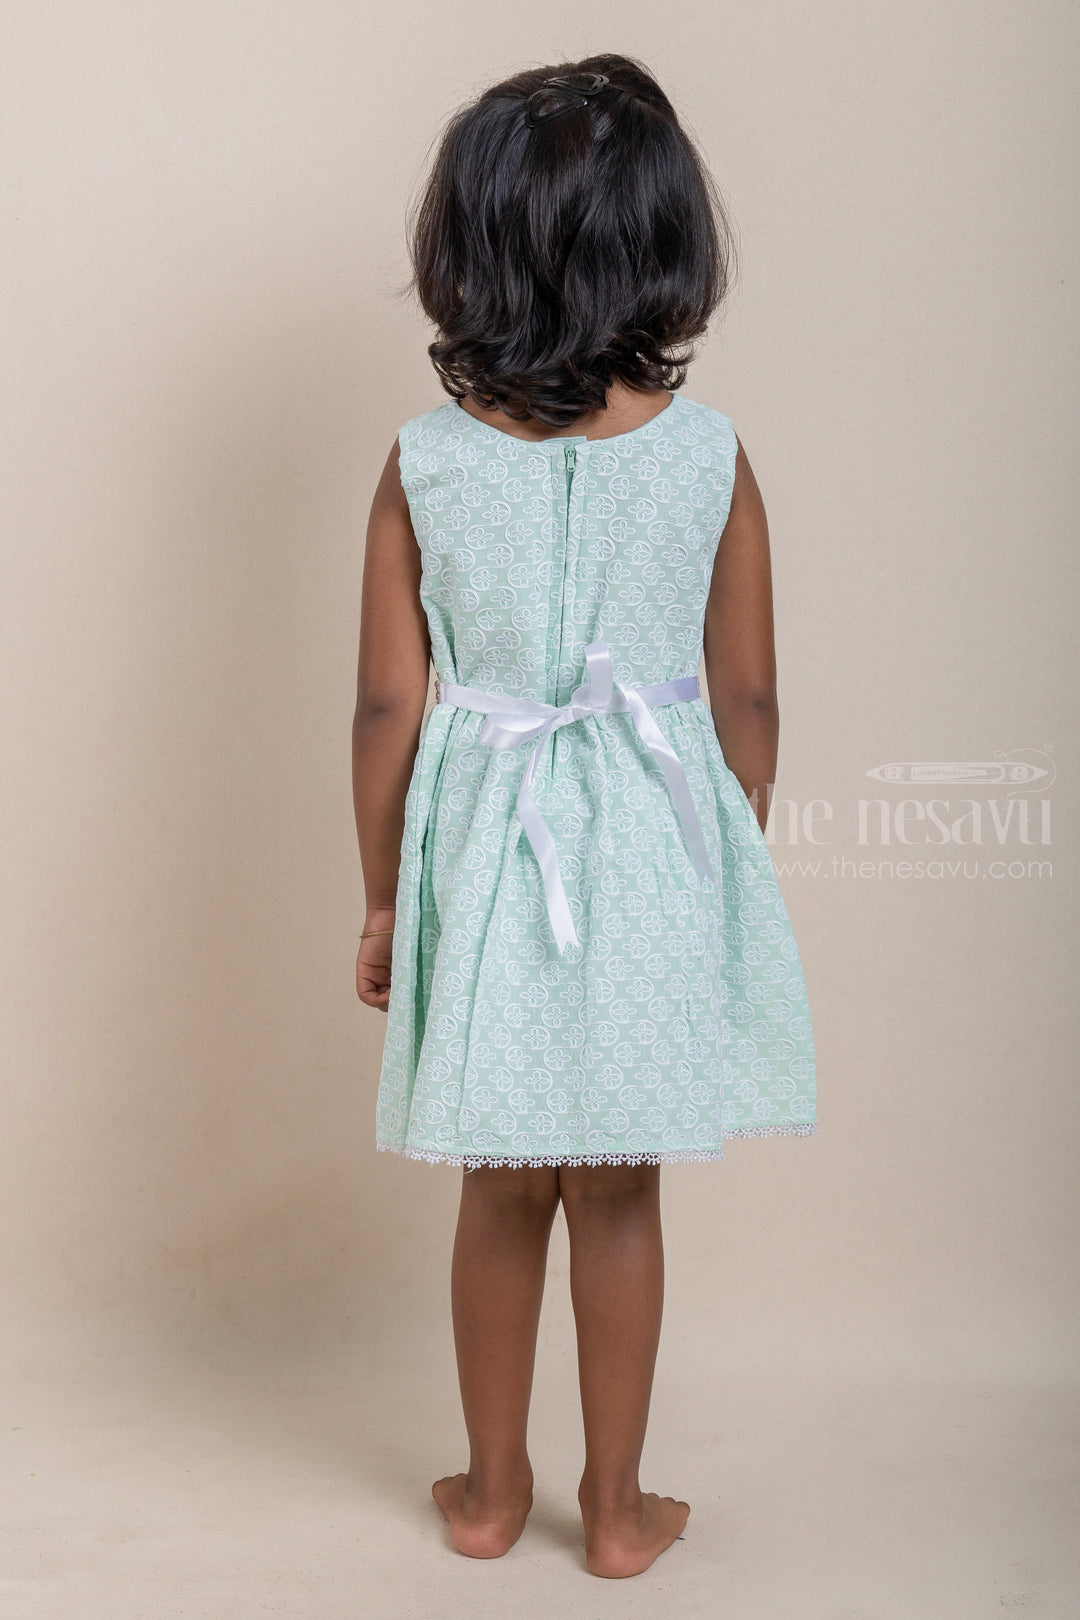 The Nesavu Baby Cotton Frocks Gorgeous All Over Floral Embroidered Green Bamboo Cotton Frock For Baby Girls Nesavu Floral Designer baby Wear Frock | Cotton Dresses For Kids | The Nesavu